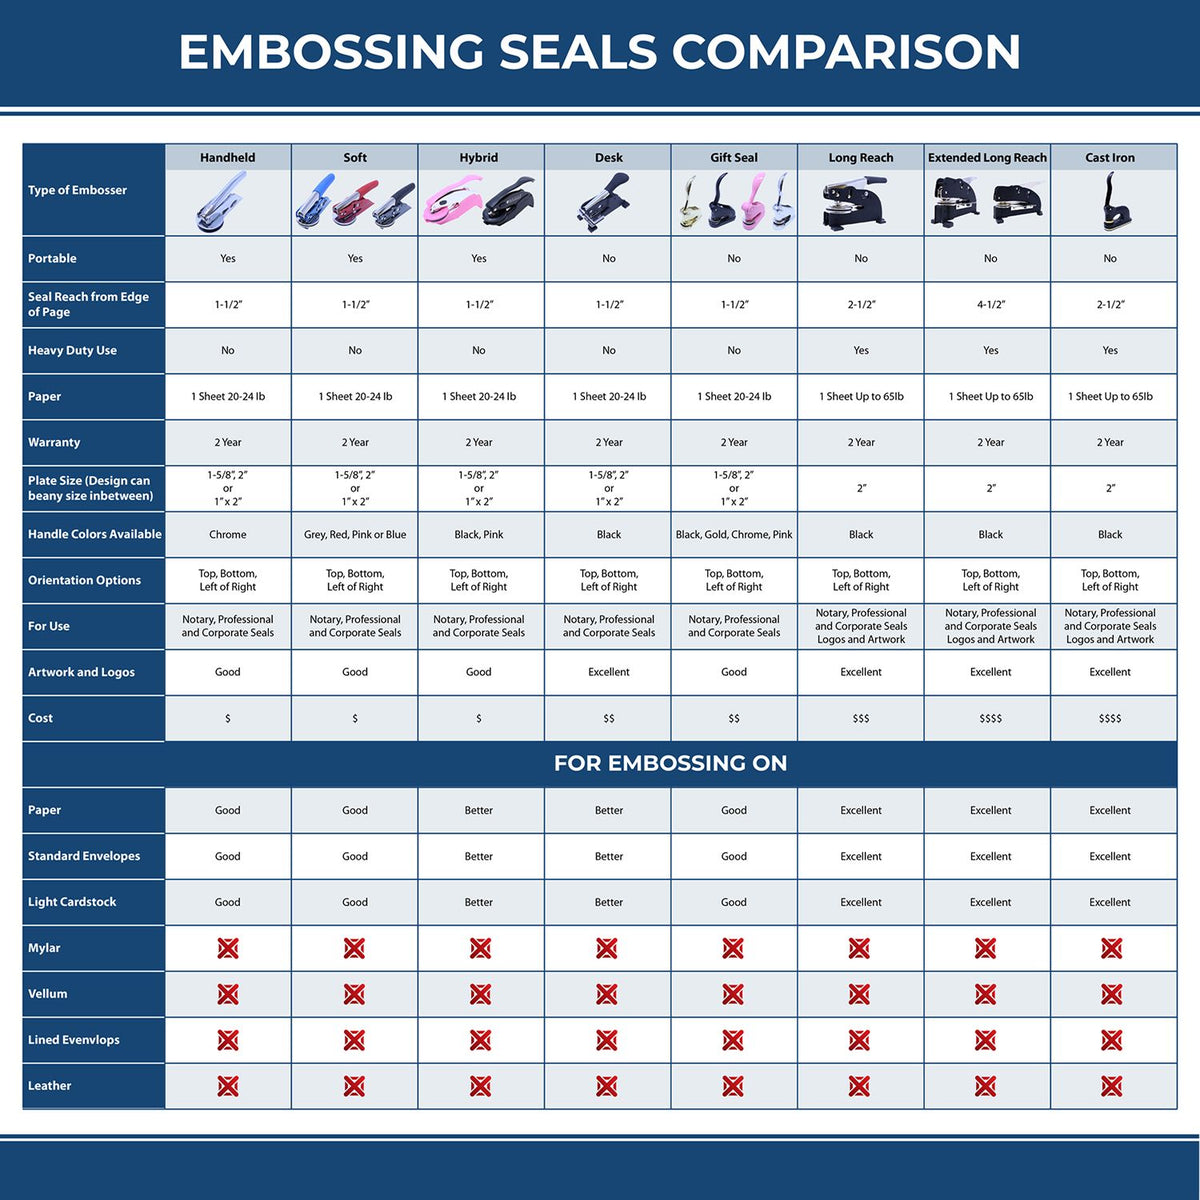 A comparison chart for the different types of mount models available for the Hybrid New Jersey Geologist Seal